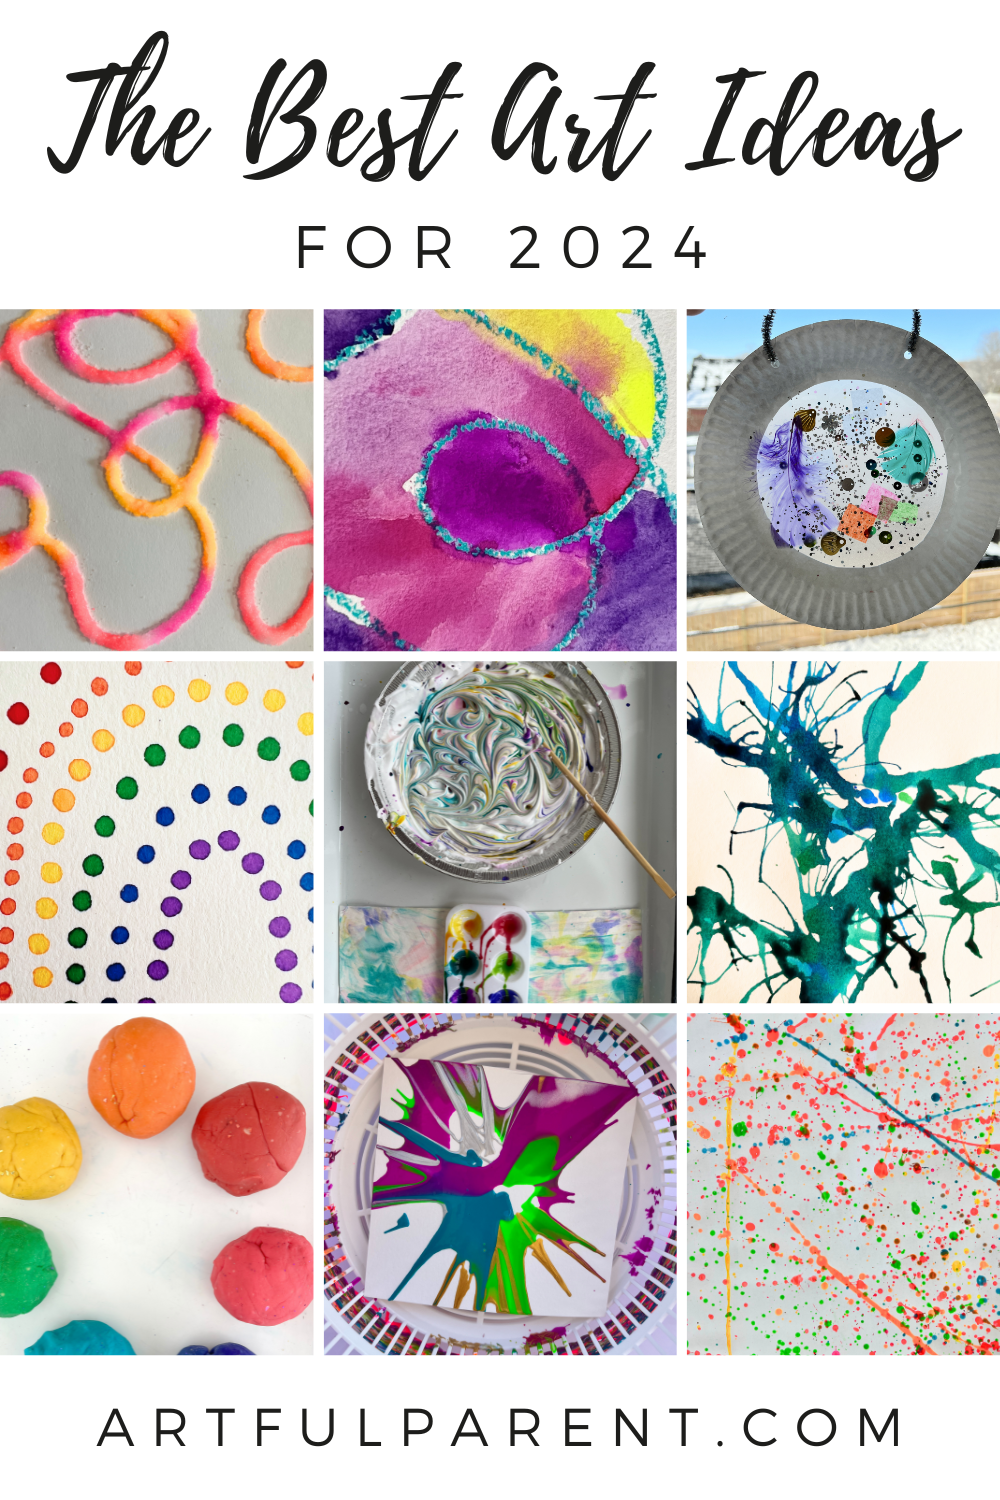 The Best Art Ideas for 2024